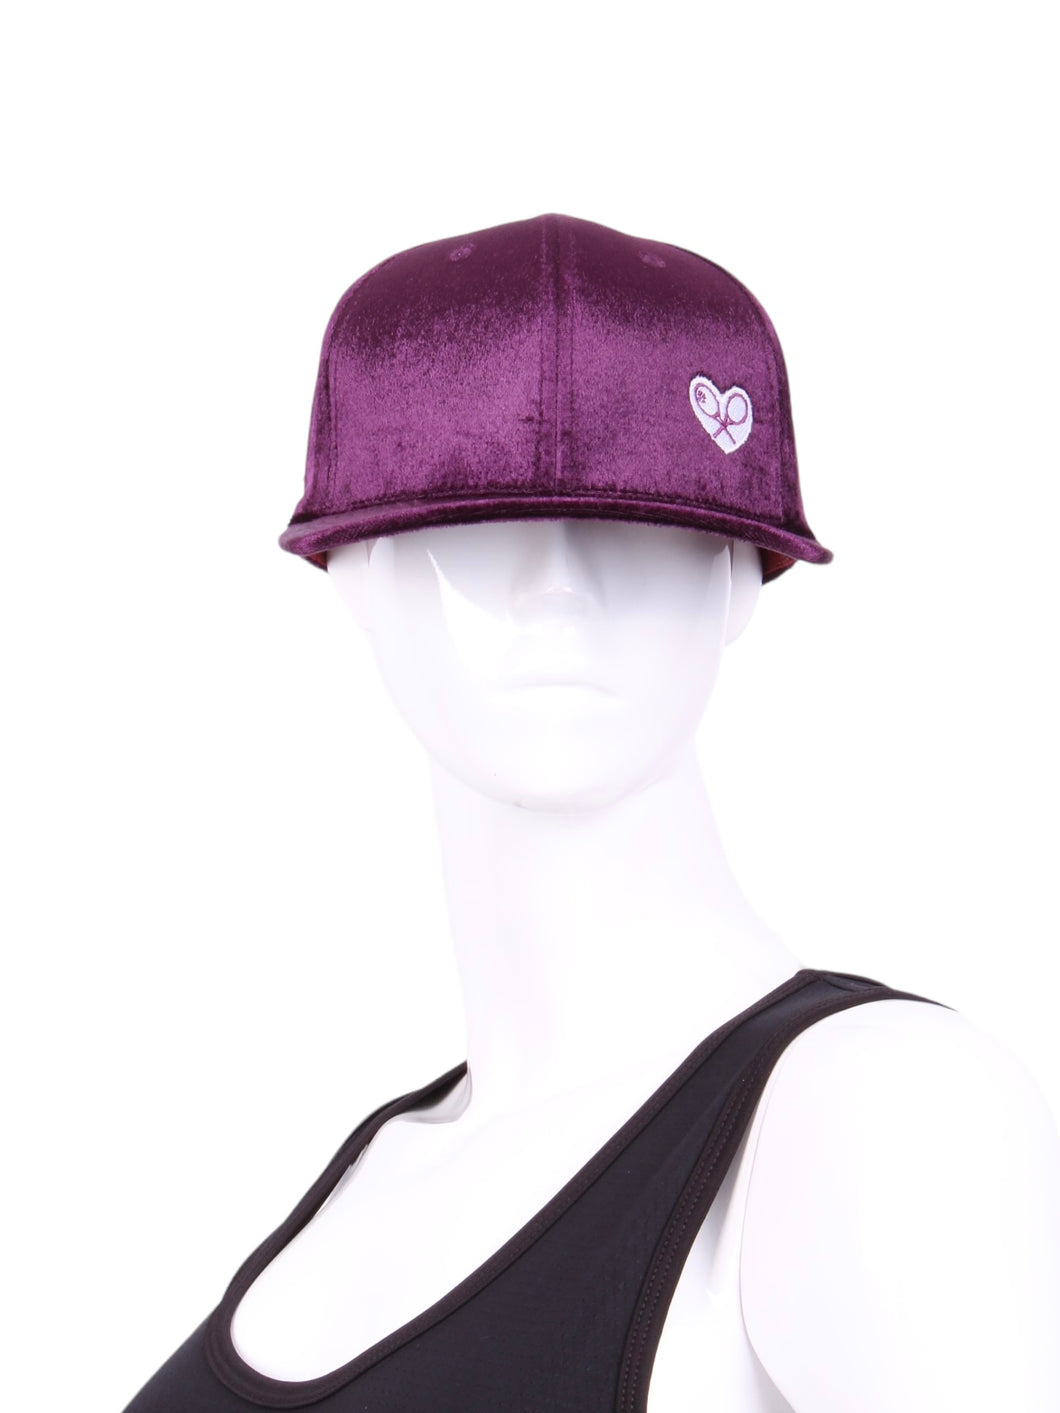 The Purple Velvet Tennis Hat exudes a unique blend of elegance and sporty charm. Crafted from a plush and rich purple velvet material, this hat sets itself apart with its luxurious texture and vibrant color. The velvet fabric catches the light in a way that creates subtle shifts in hue, adding depth to the overall appearance.